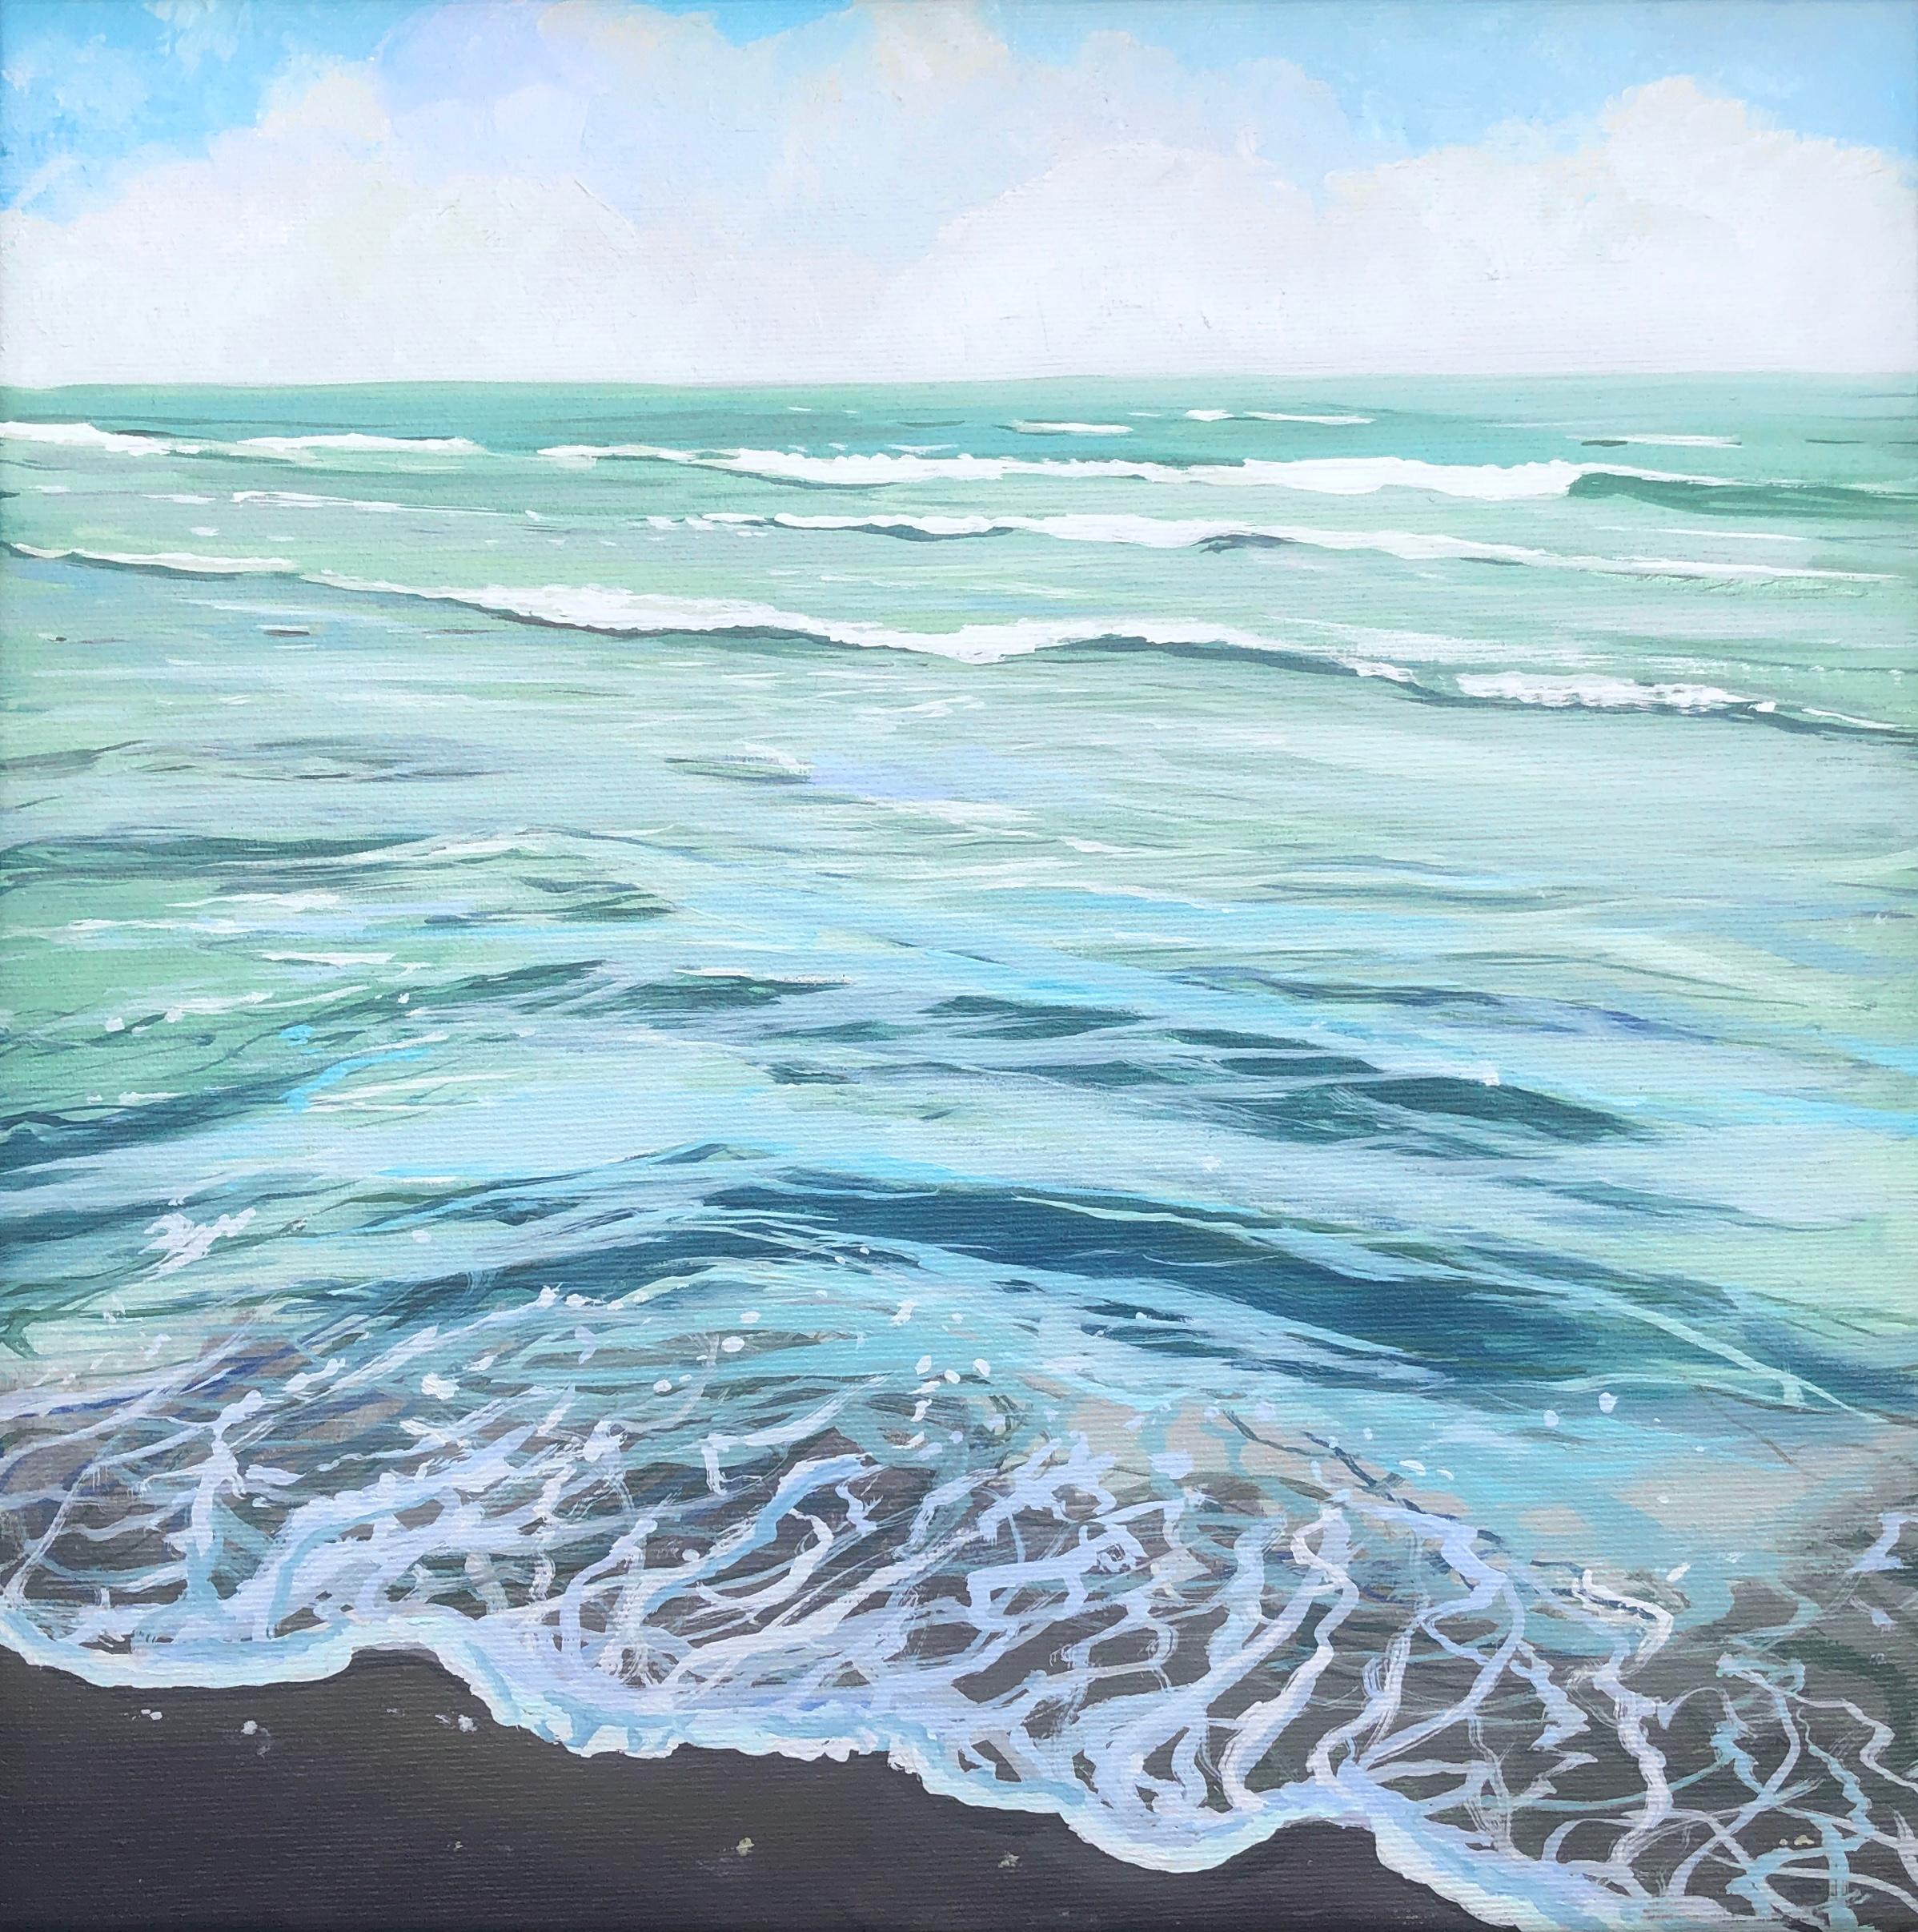 Alberto Biesok Landscape Painting - waves on the beach Spain oil on canvas painting seascape